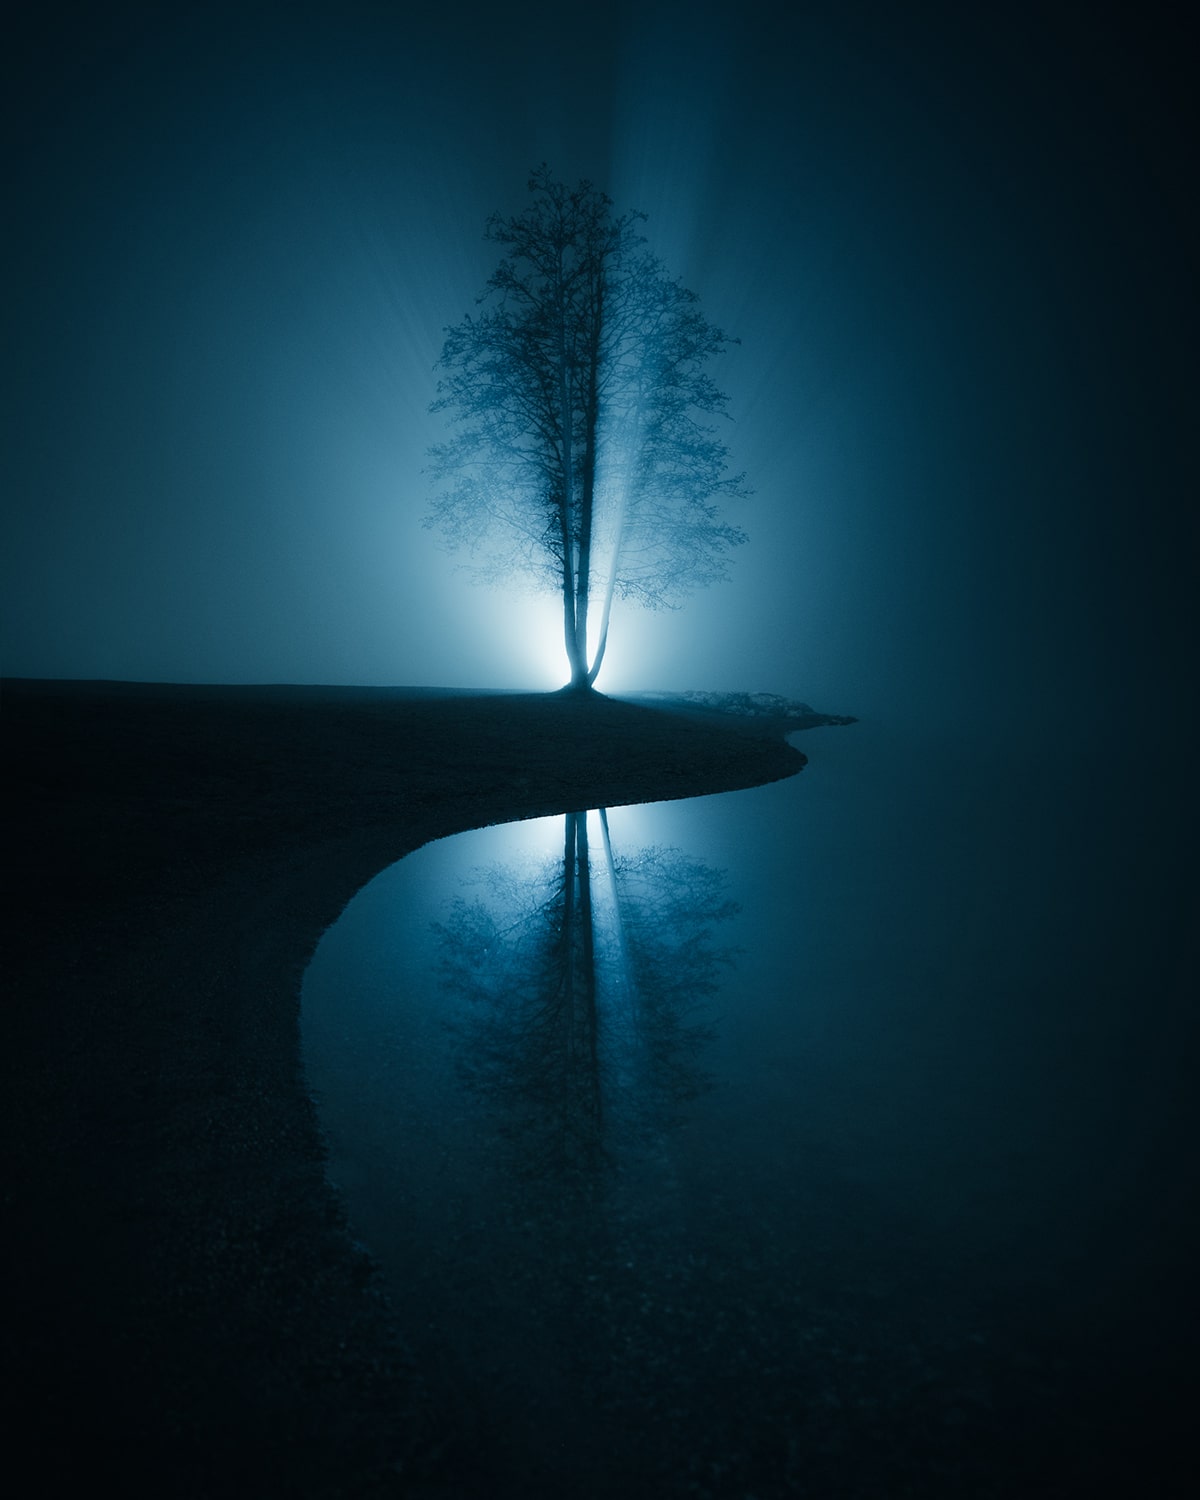 Mysterious Backlit Tree at Night